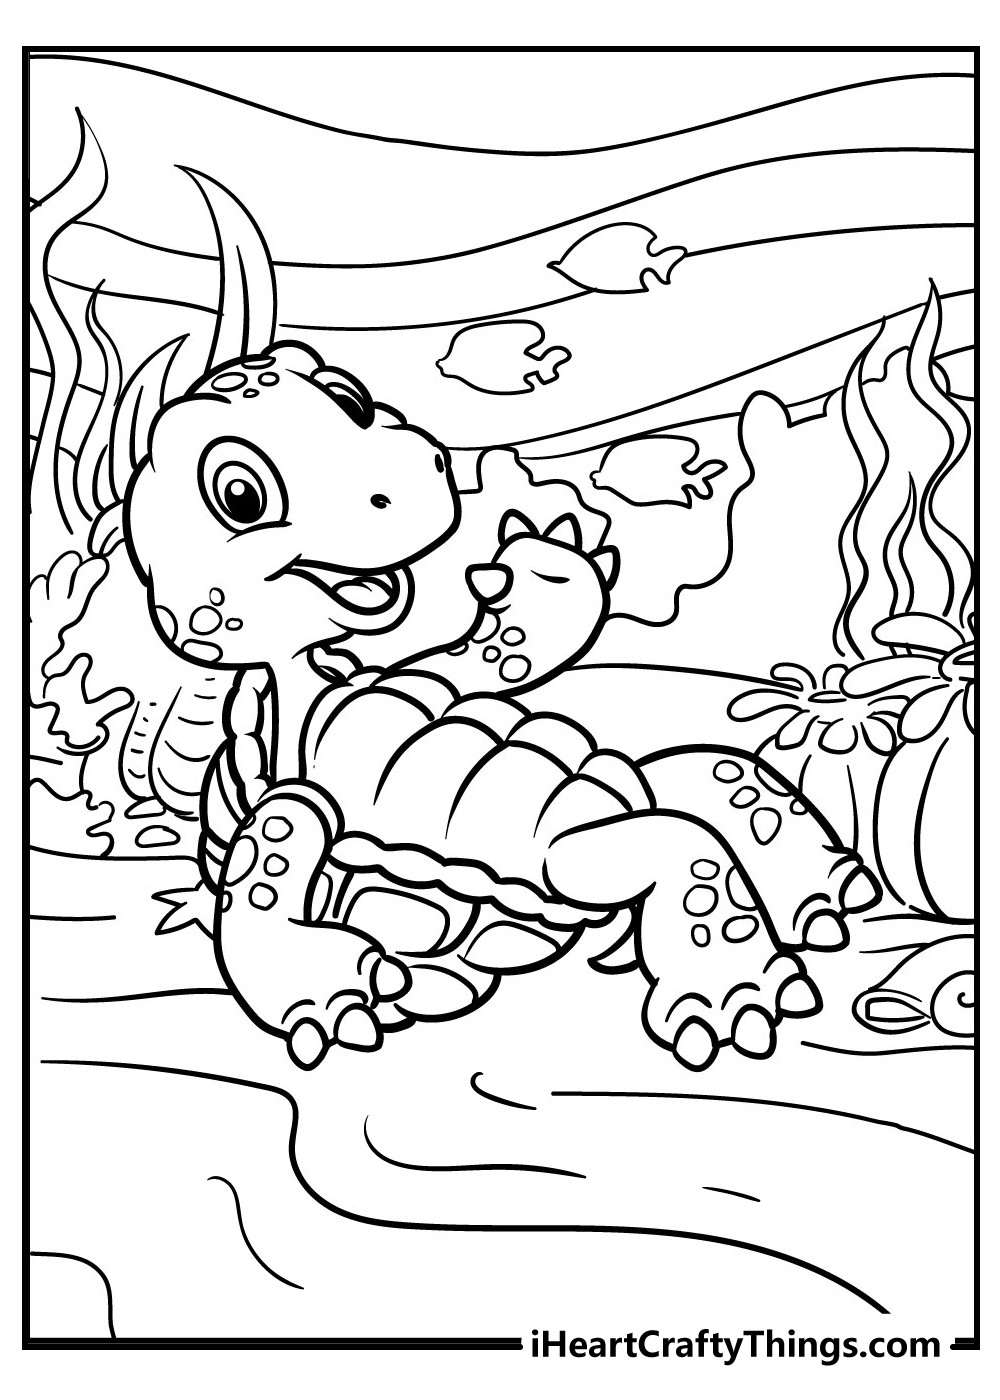 Turtle Coloring Pages Updated 20